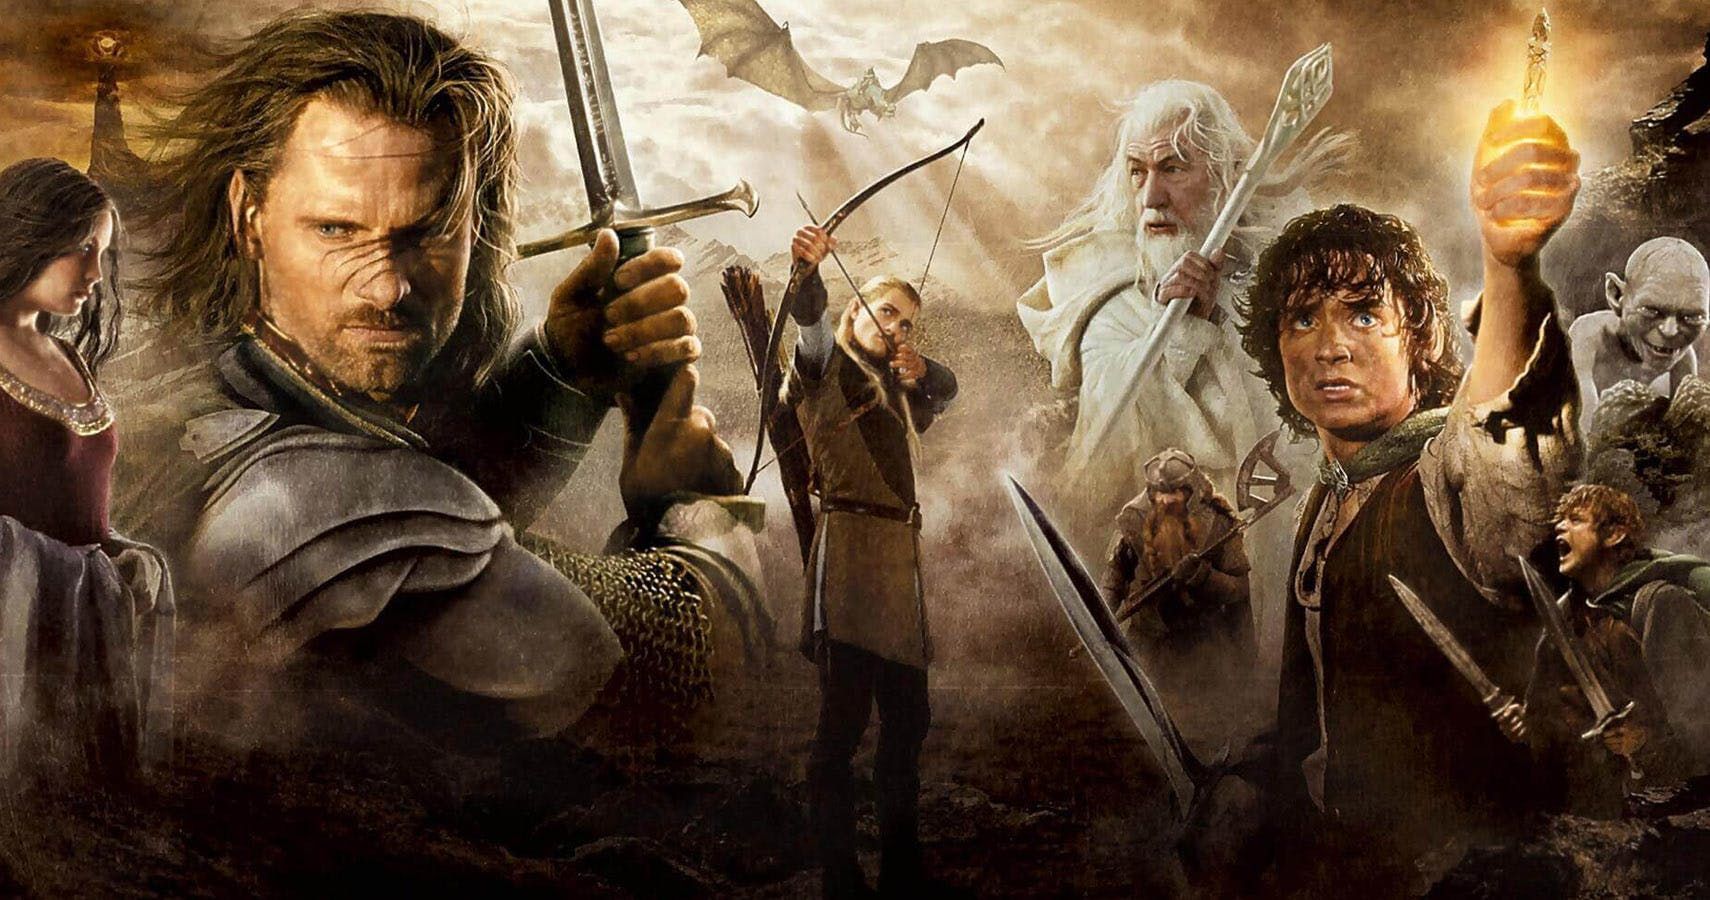 LOTR 10 Facts About Middle Earth They Left Out of the Movies